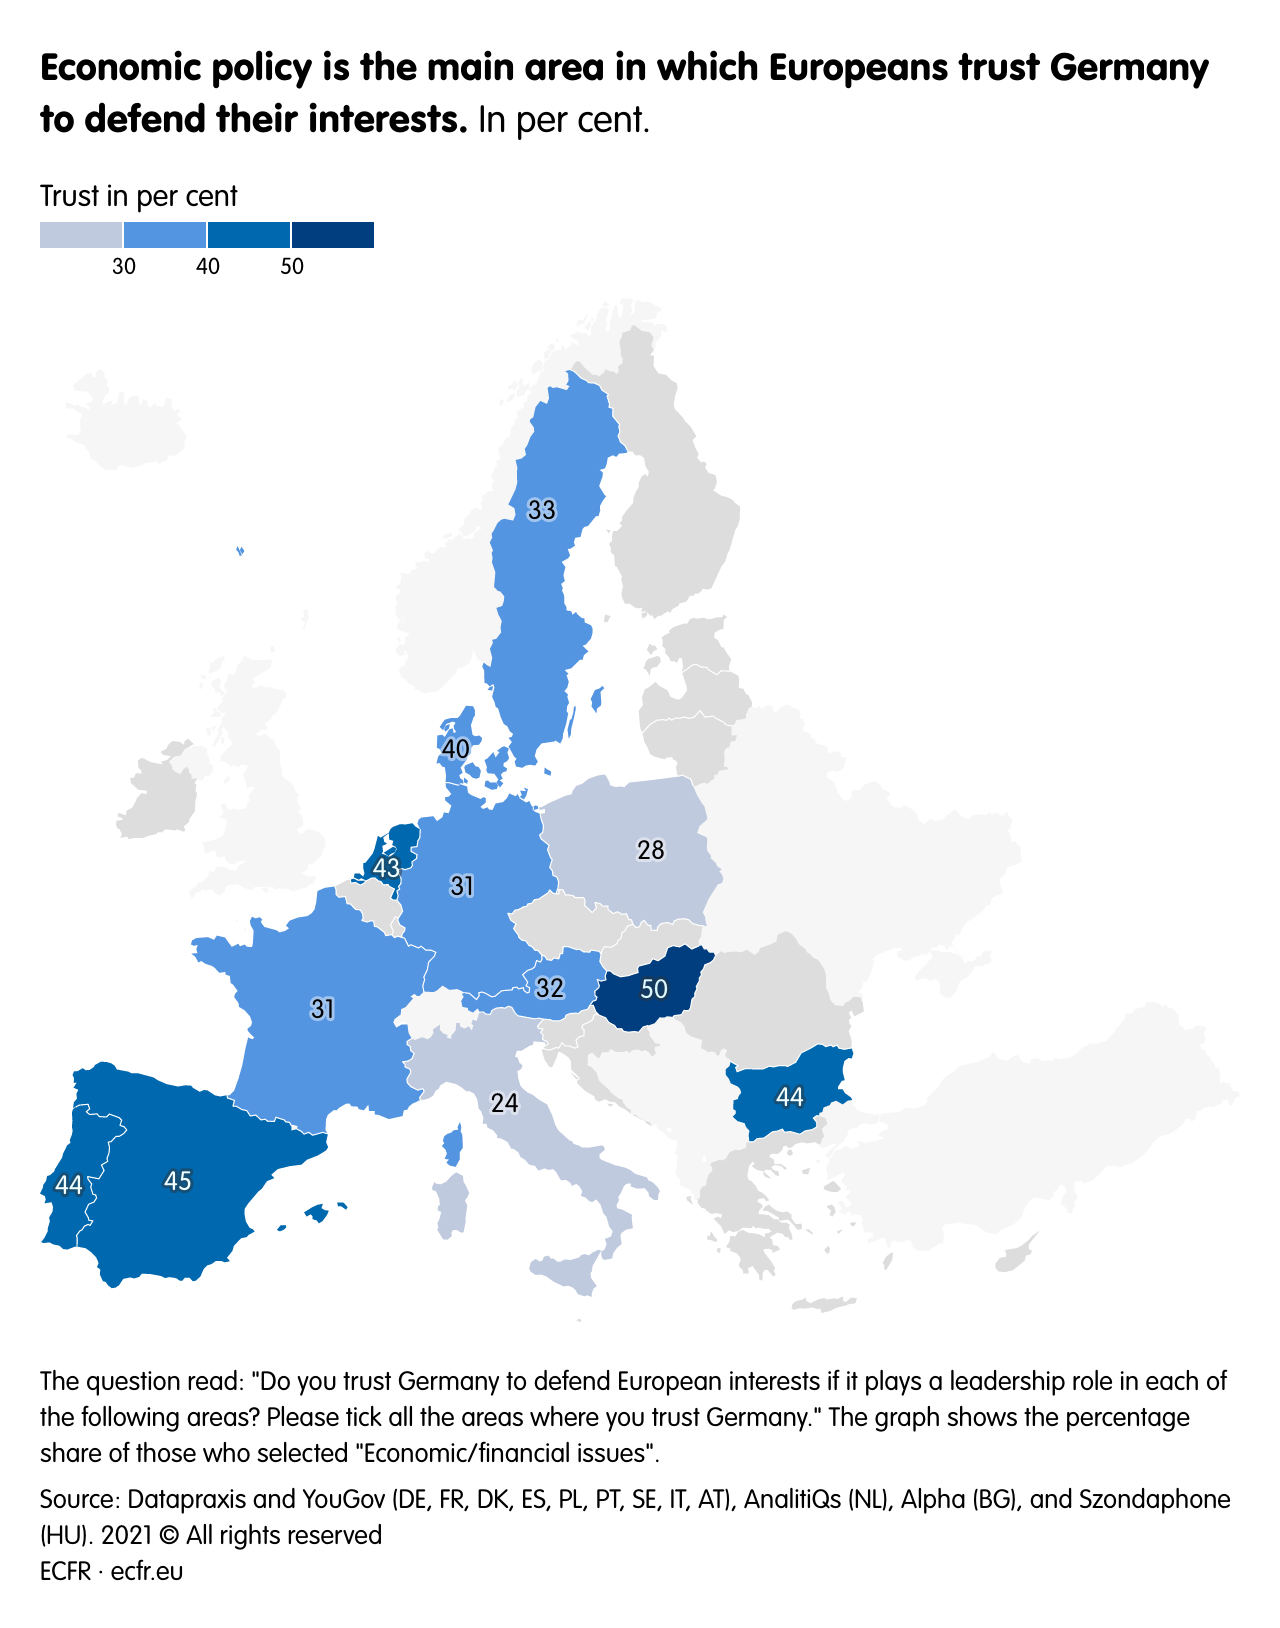 Economic policy is the main area in which Europeans trust Germany to defend their interests.